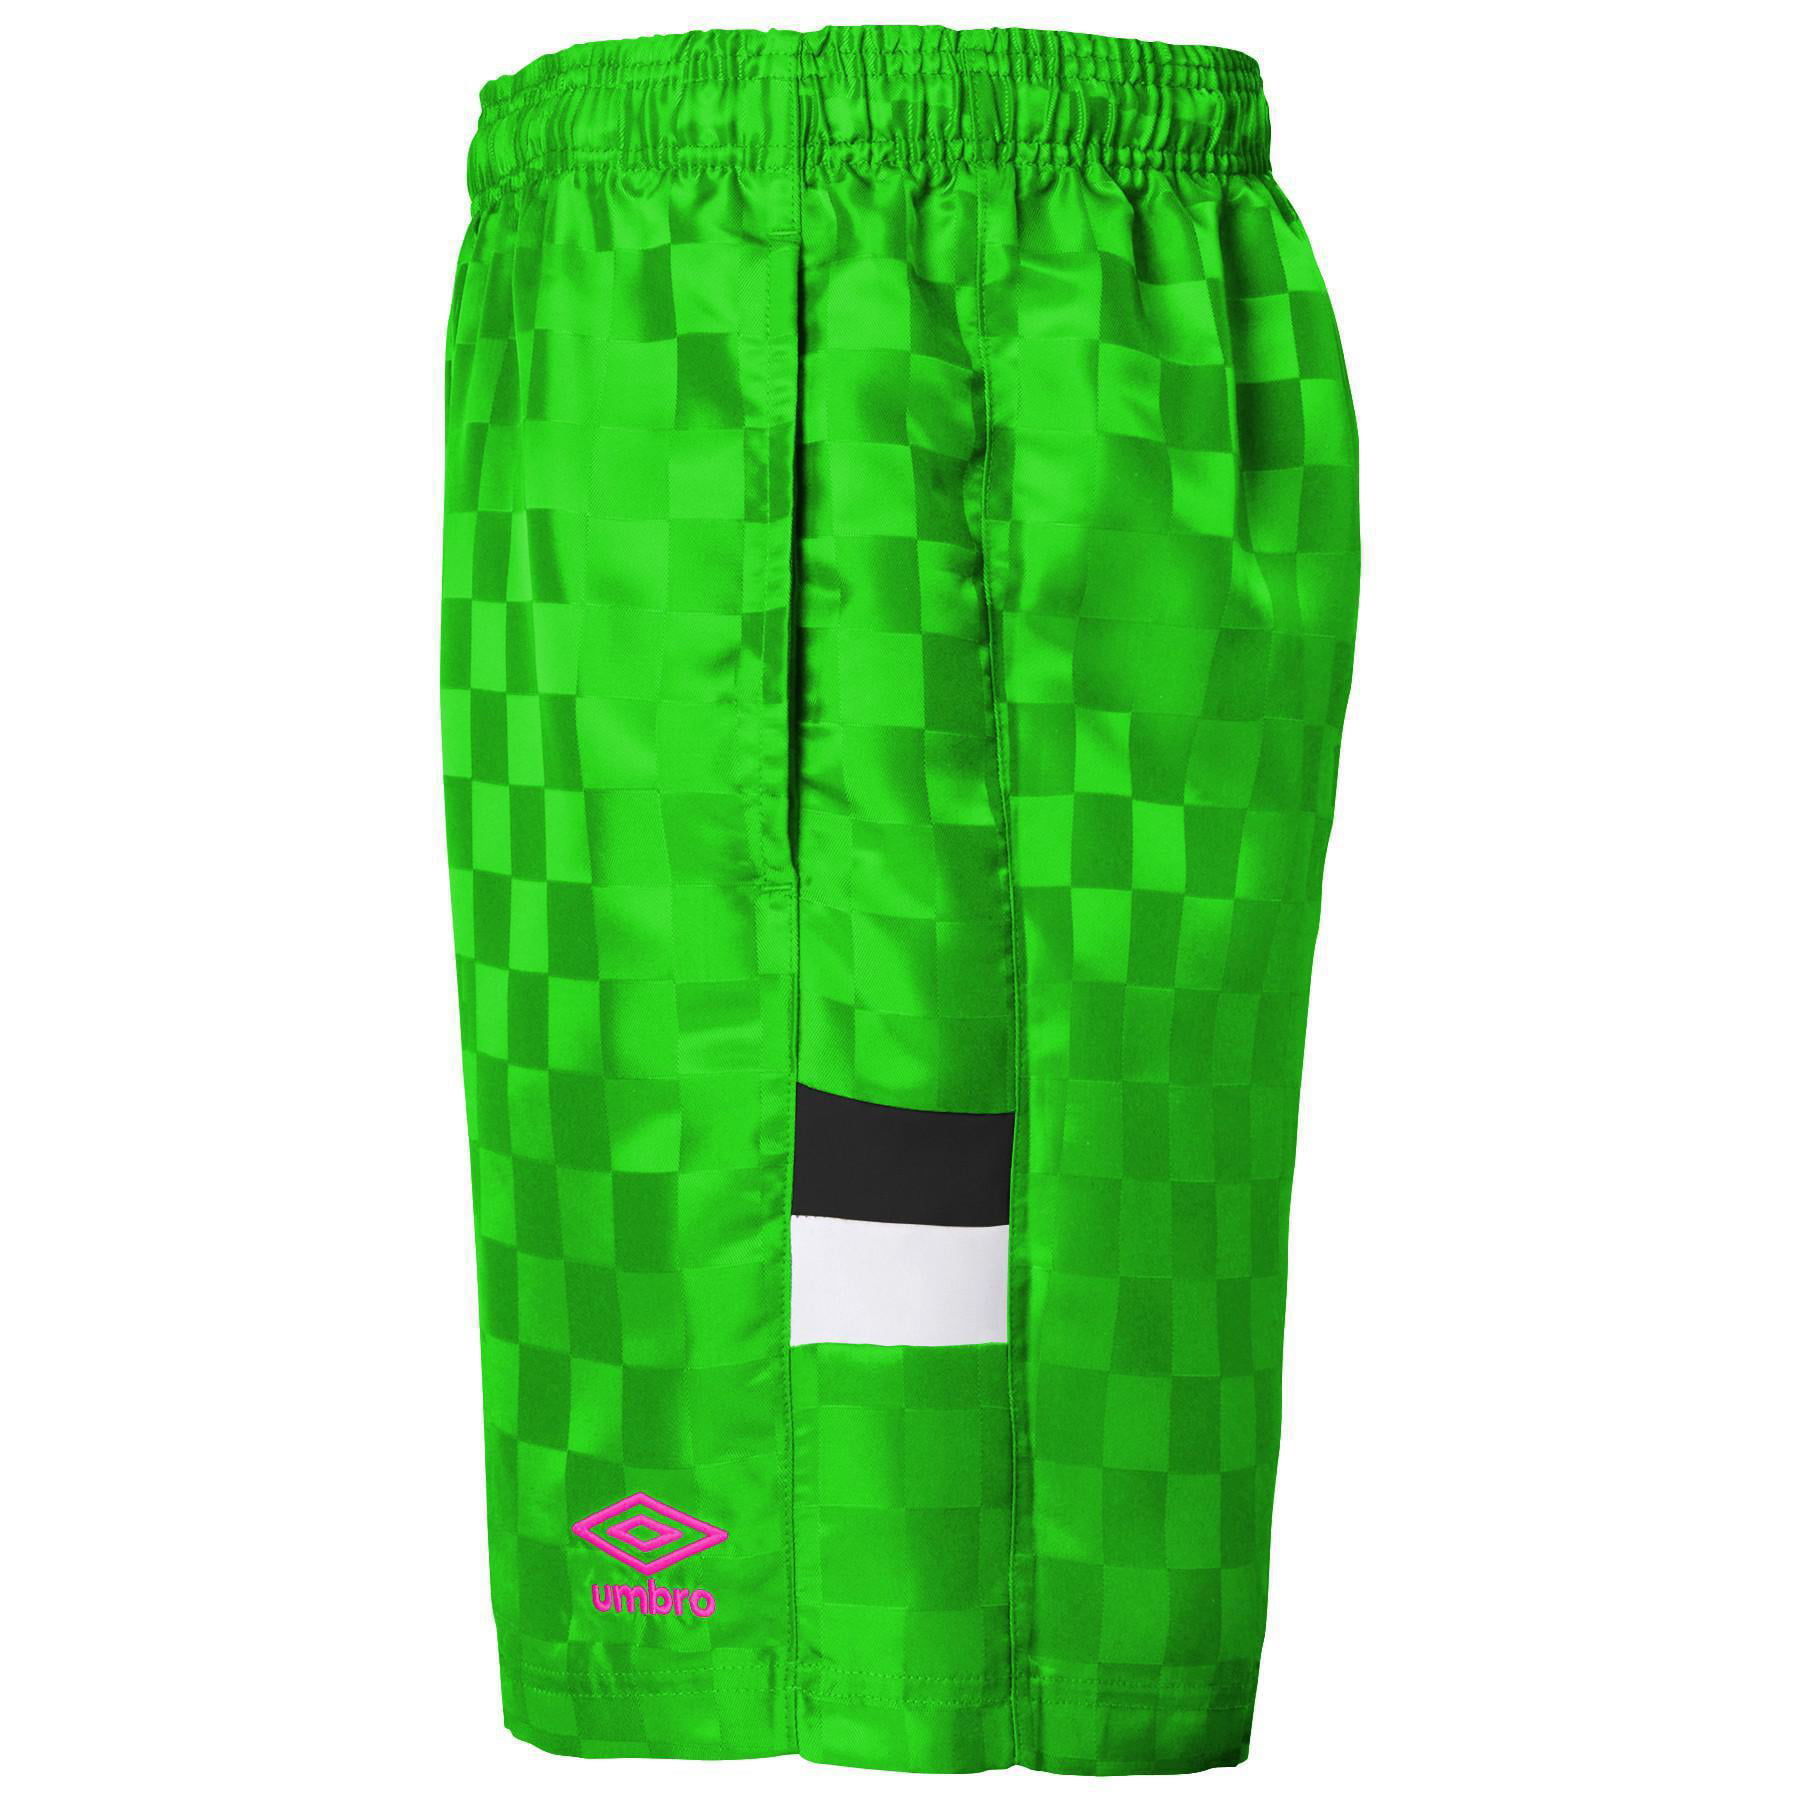 Umbro Youth Soccer Shorts Classic Checkerboard Large Black Poly Girls Boys New 